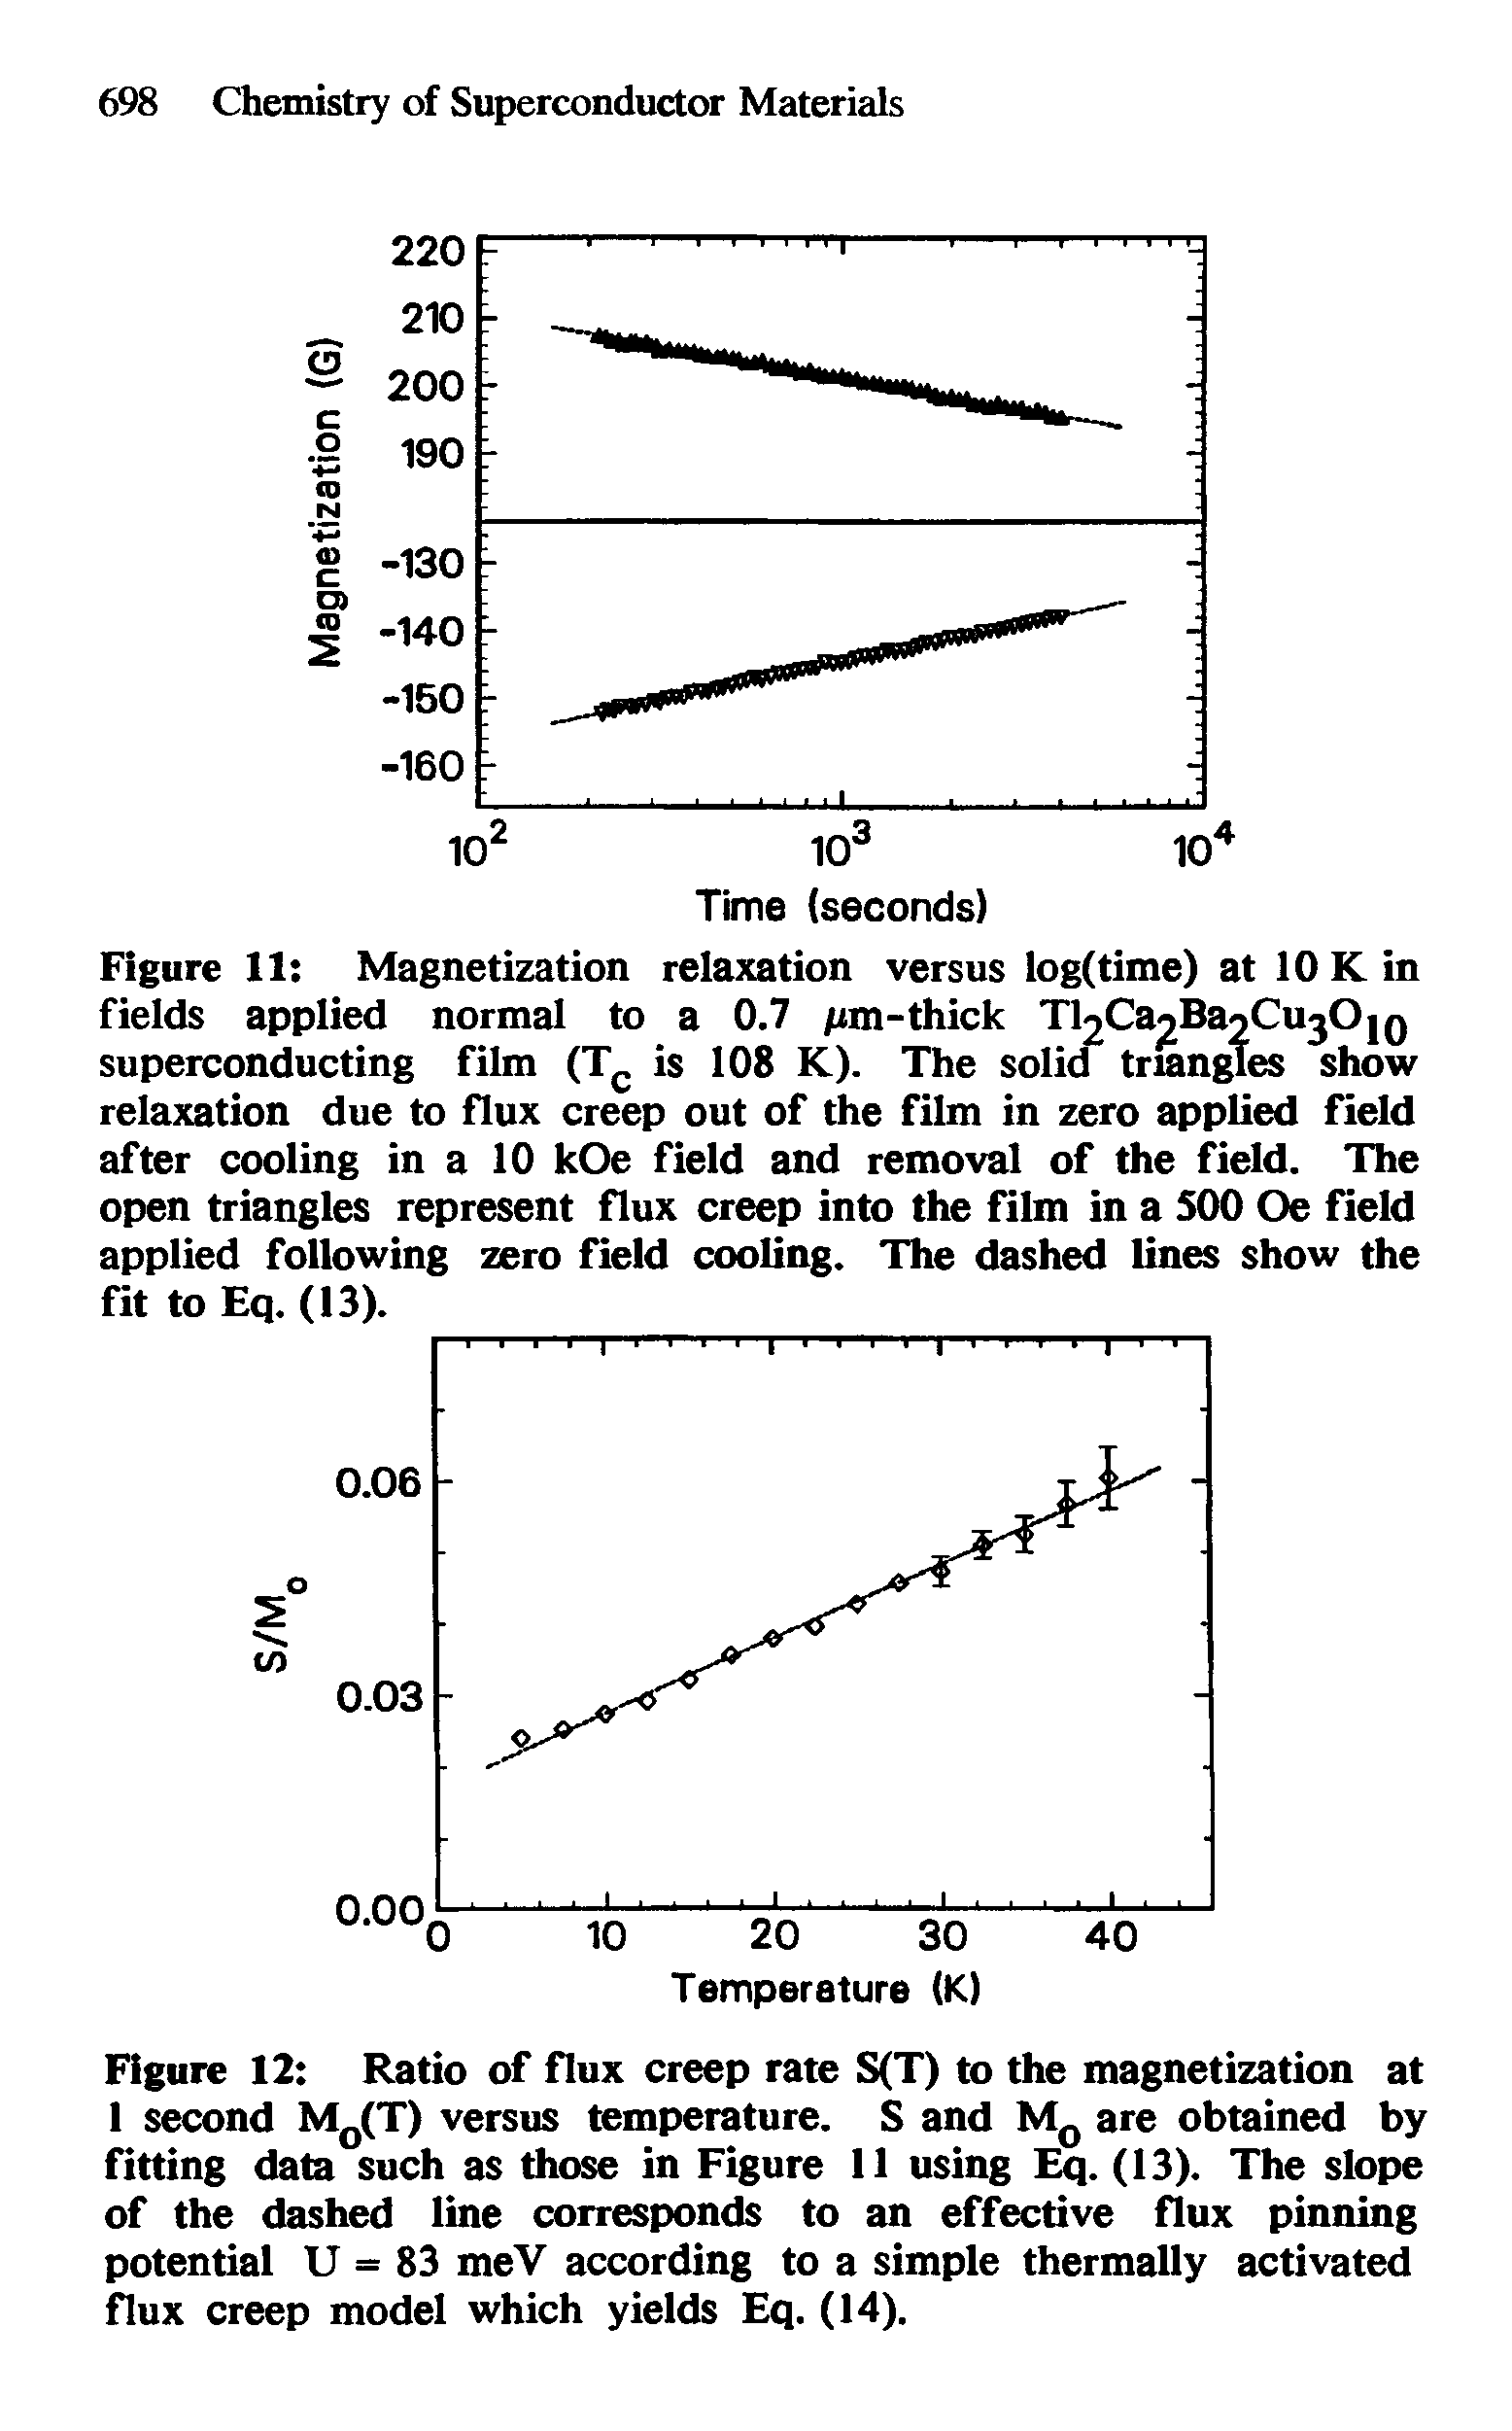 Figure 12 Ratio of flux creep rate S(T) to the magnetization at 1 second MQ(T) versus temperature. S and MQ are obtained by fitting data such as those in Figure 11 using Eq. (13). The slope of the dashed line corresponds to an effective flux pinning potential U = 83 meV according to a simple thermally activated flux creep model which yields Eq. (14).